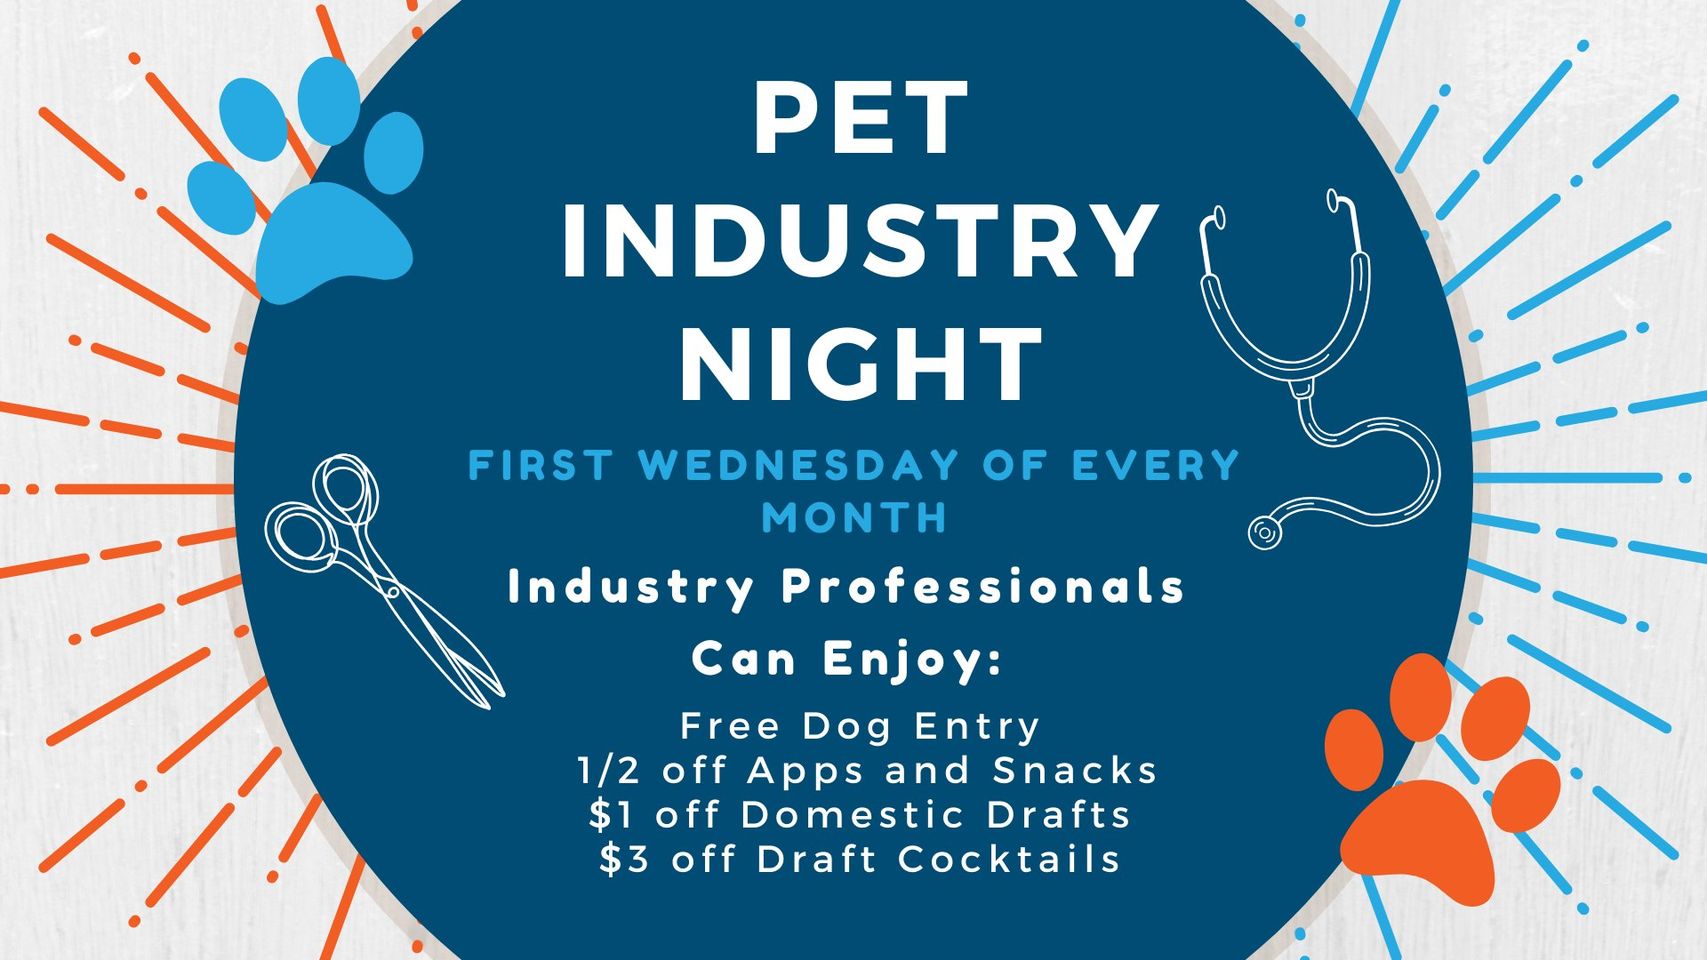 Pet Industry Night. First Wednesday of every month. Industry professionals can enjoy: free dog entry, 1/2 off apps and snacks, $1 off domestic drafts, and $3 off draft cocktails.